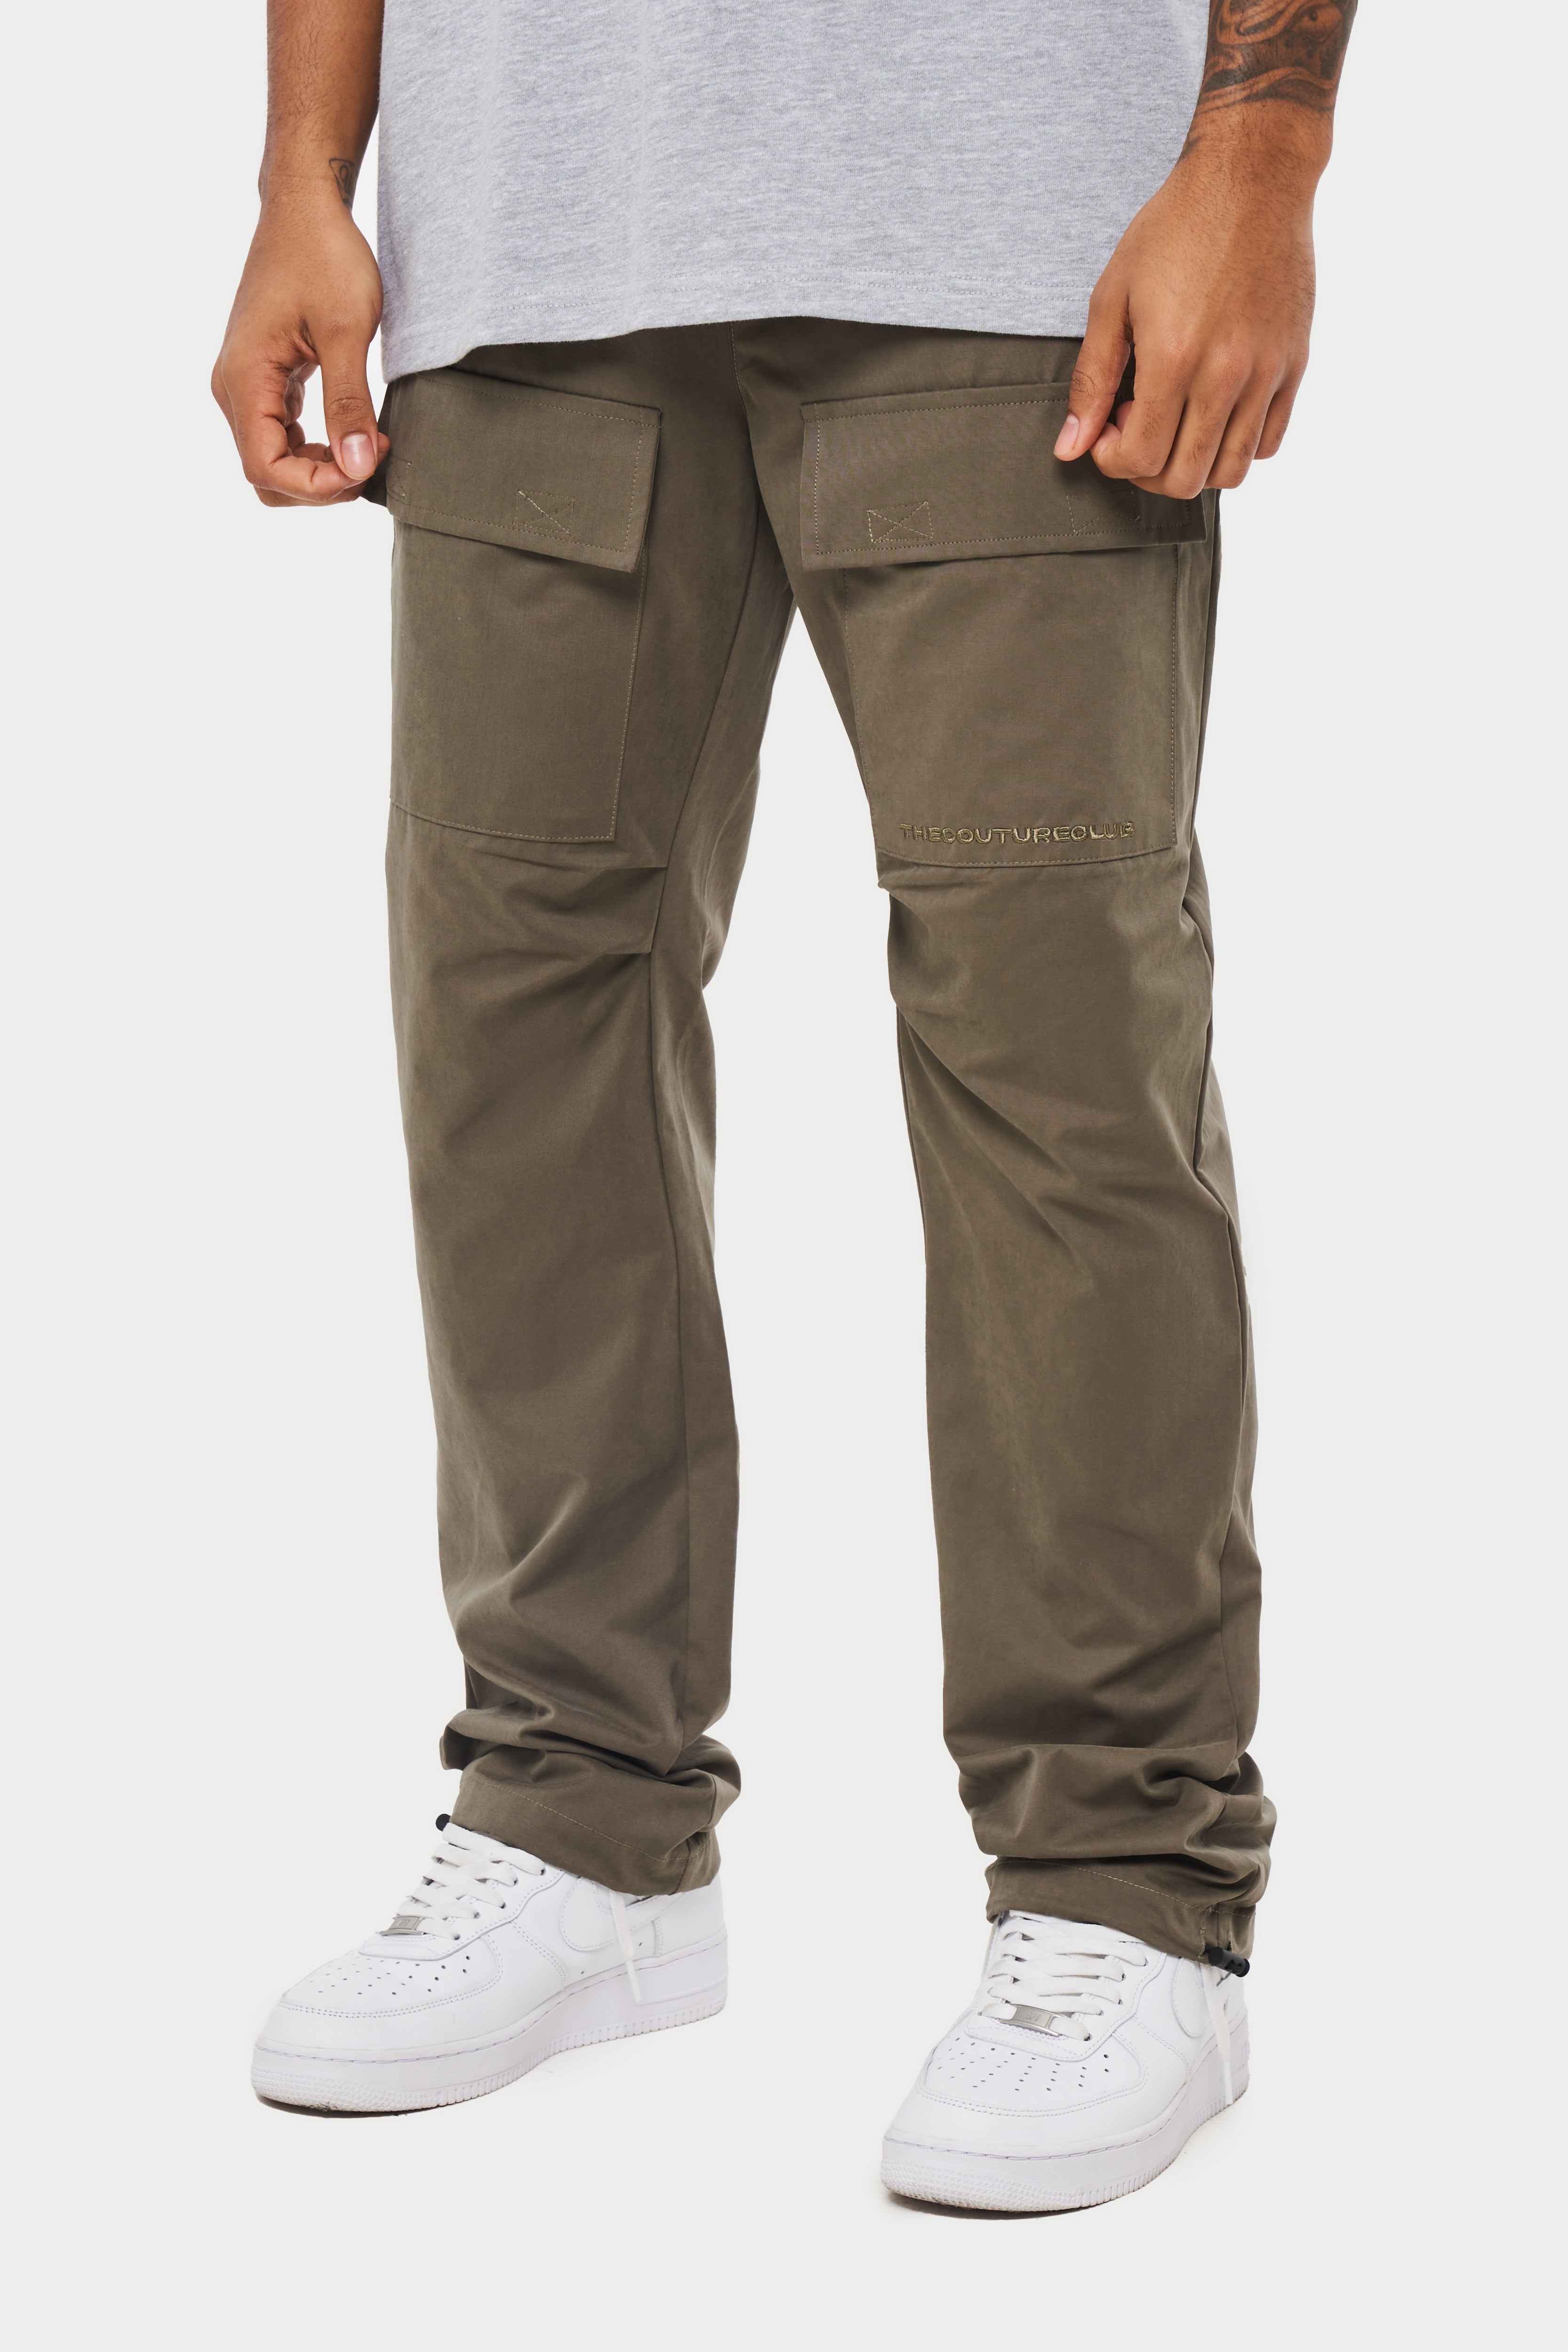 Buy VAYOO Printed Cargo Pants for Men 100% Pure Cotton All Over Stylish  Print with 2 Front Pockets 1 with Zip, 2 Back Pocket and 2 Cargo Pockets.  Online at Best Prices in India - JioMart.